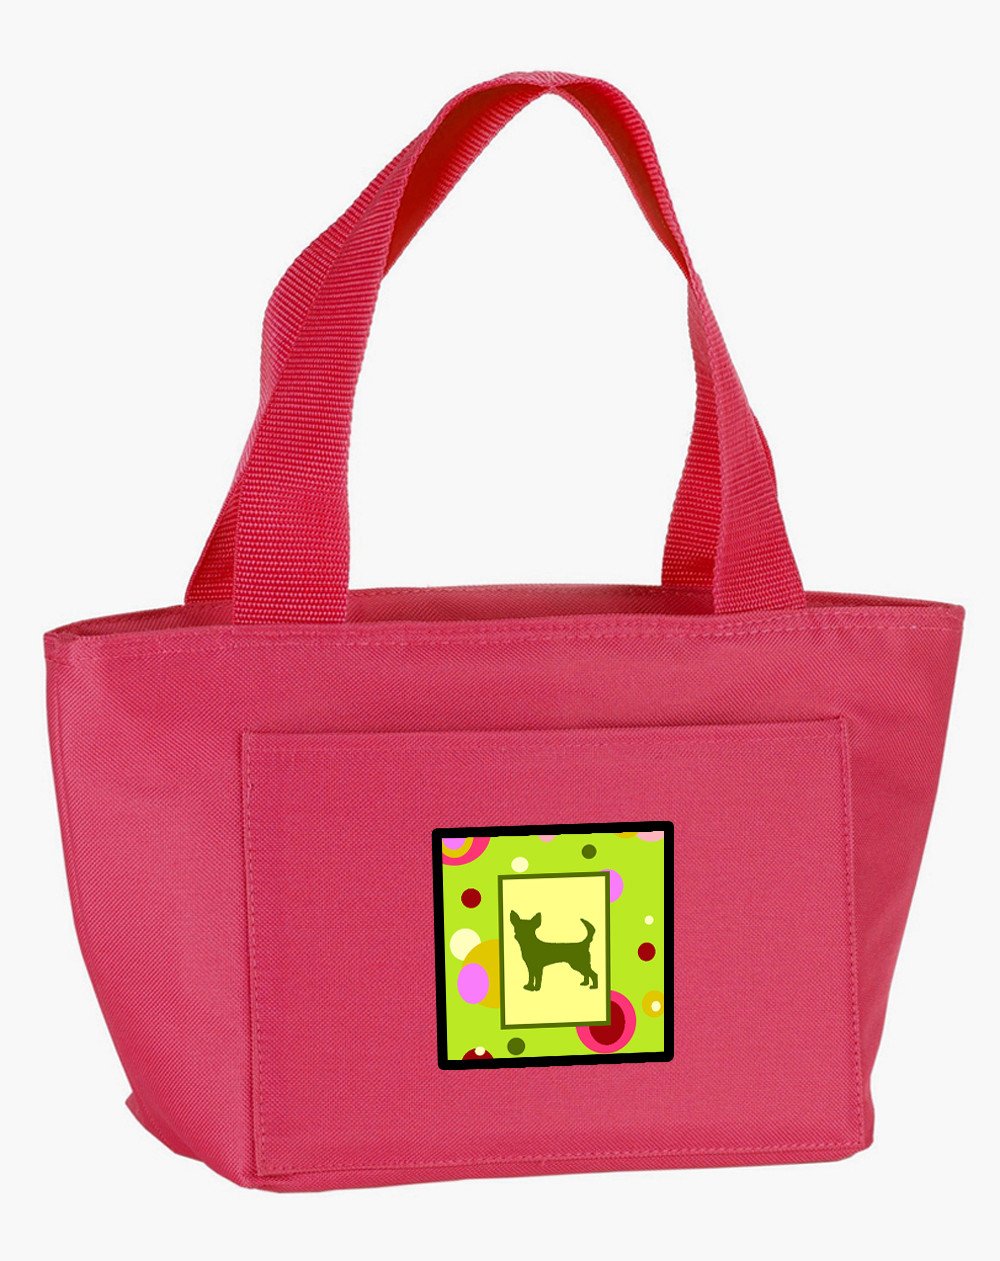 Lime Green Dots Chihuahua Lunch Bag CK1086PK-8808 by Caroline's Treasures